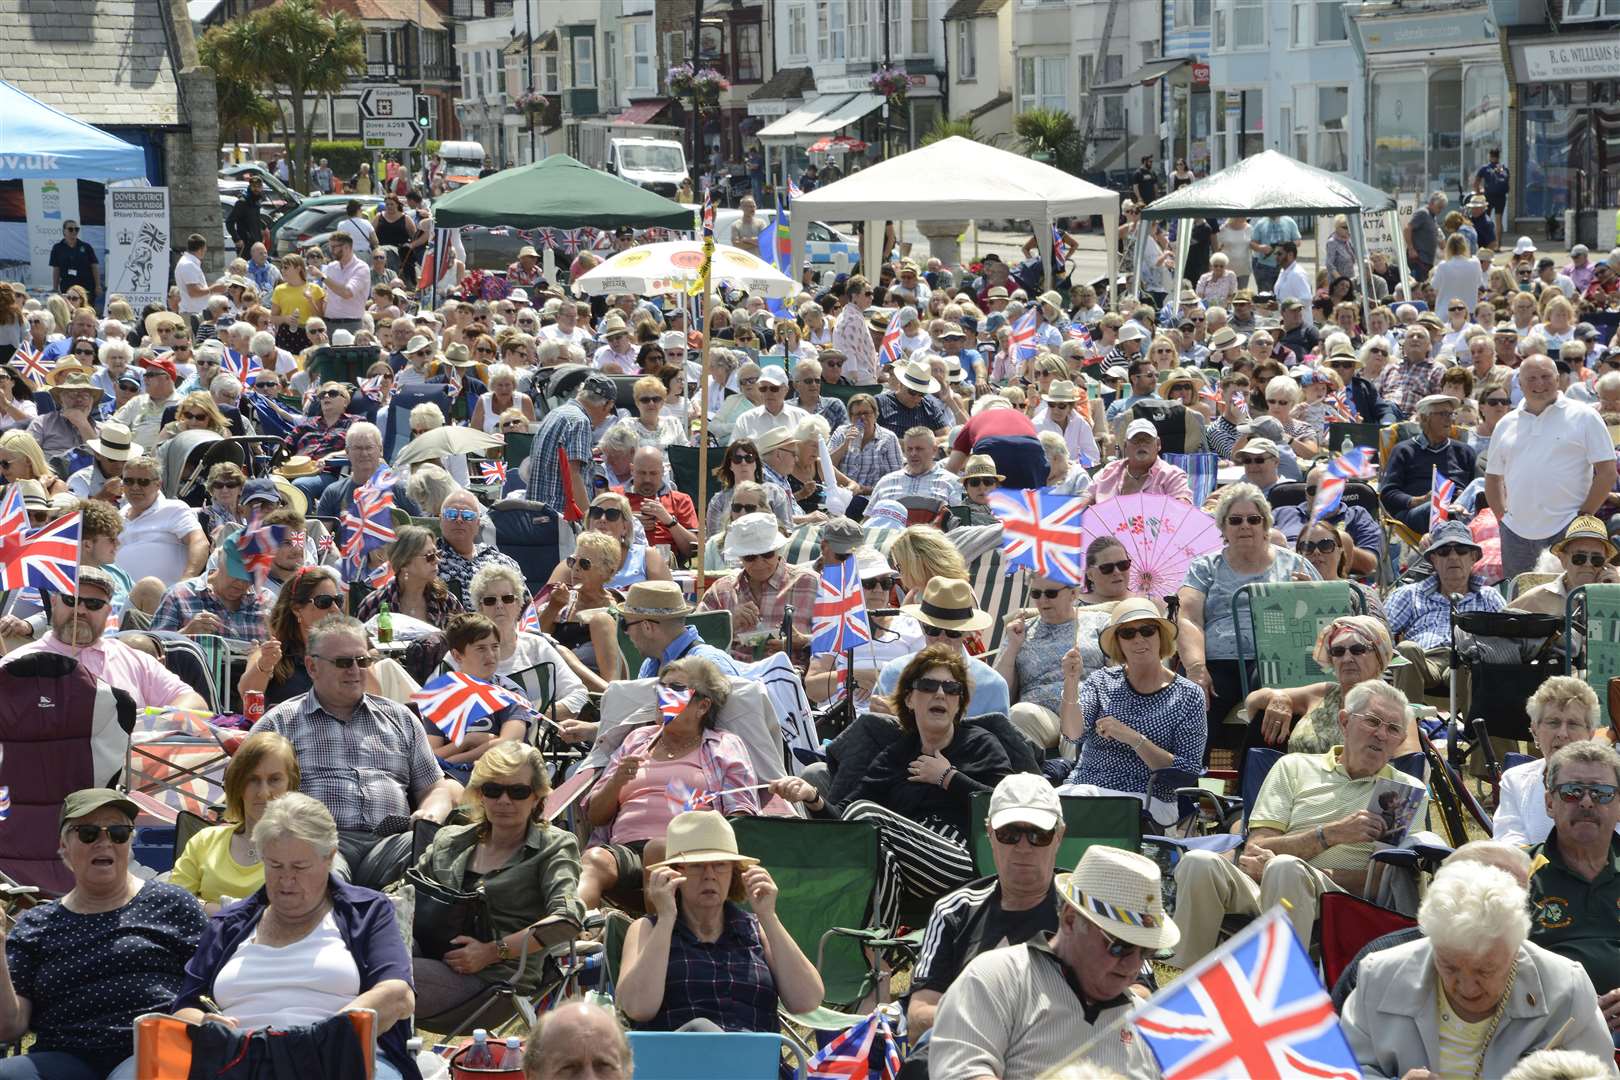 The huge crowd at the Royal Marines show.Picture: Paul Amos